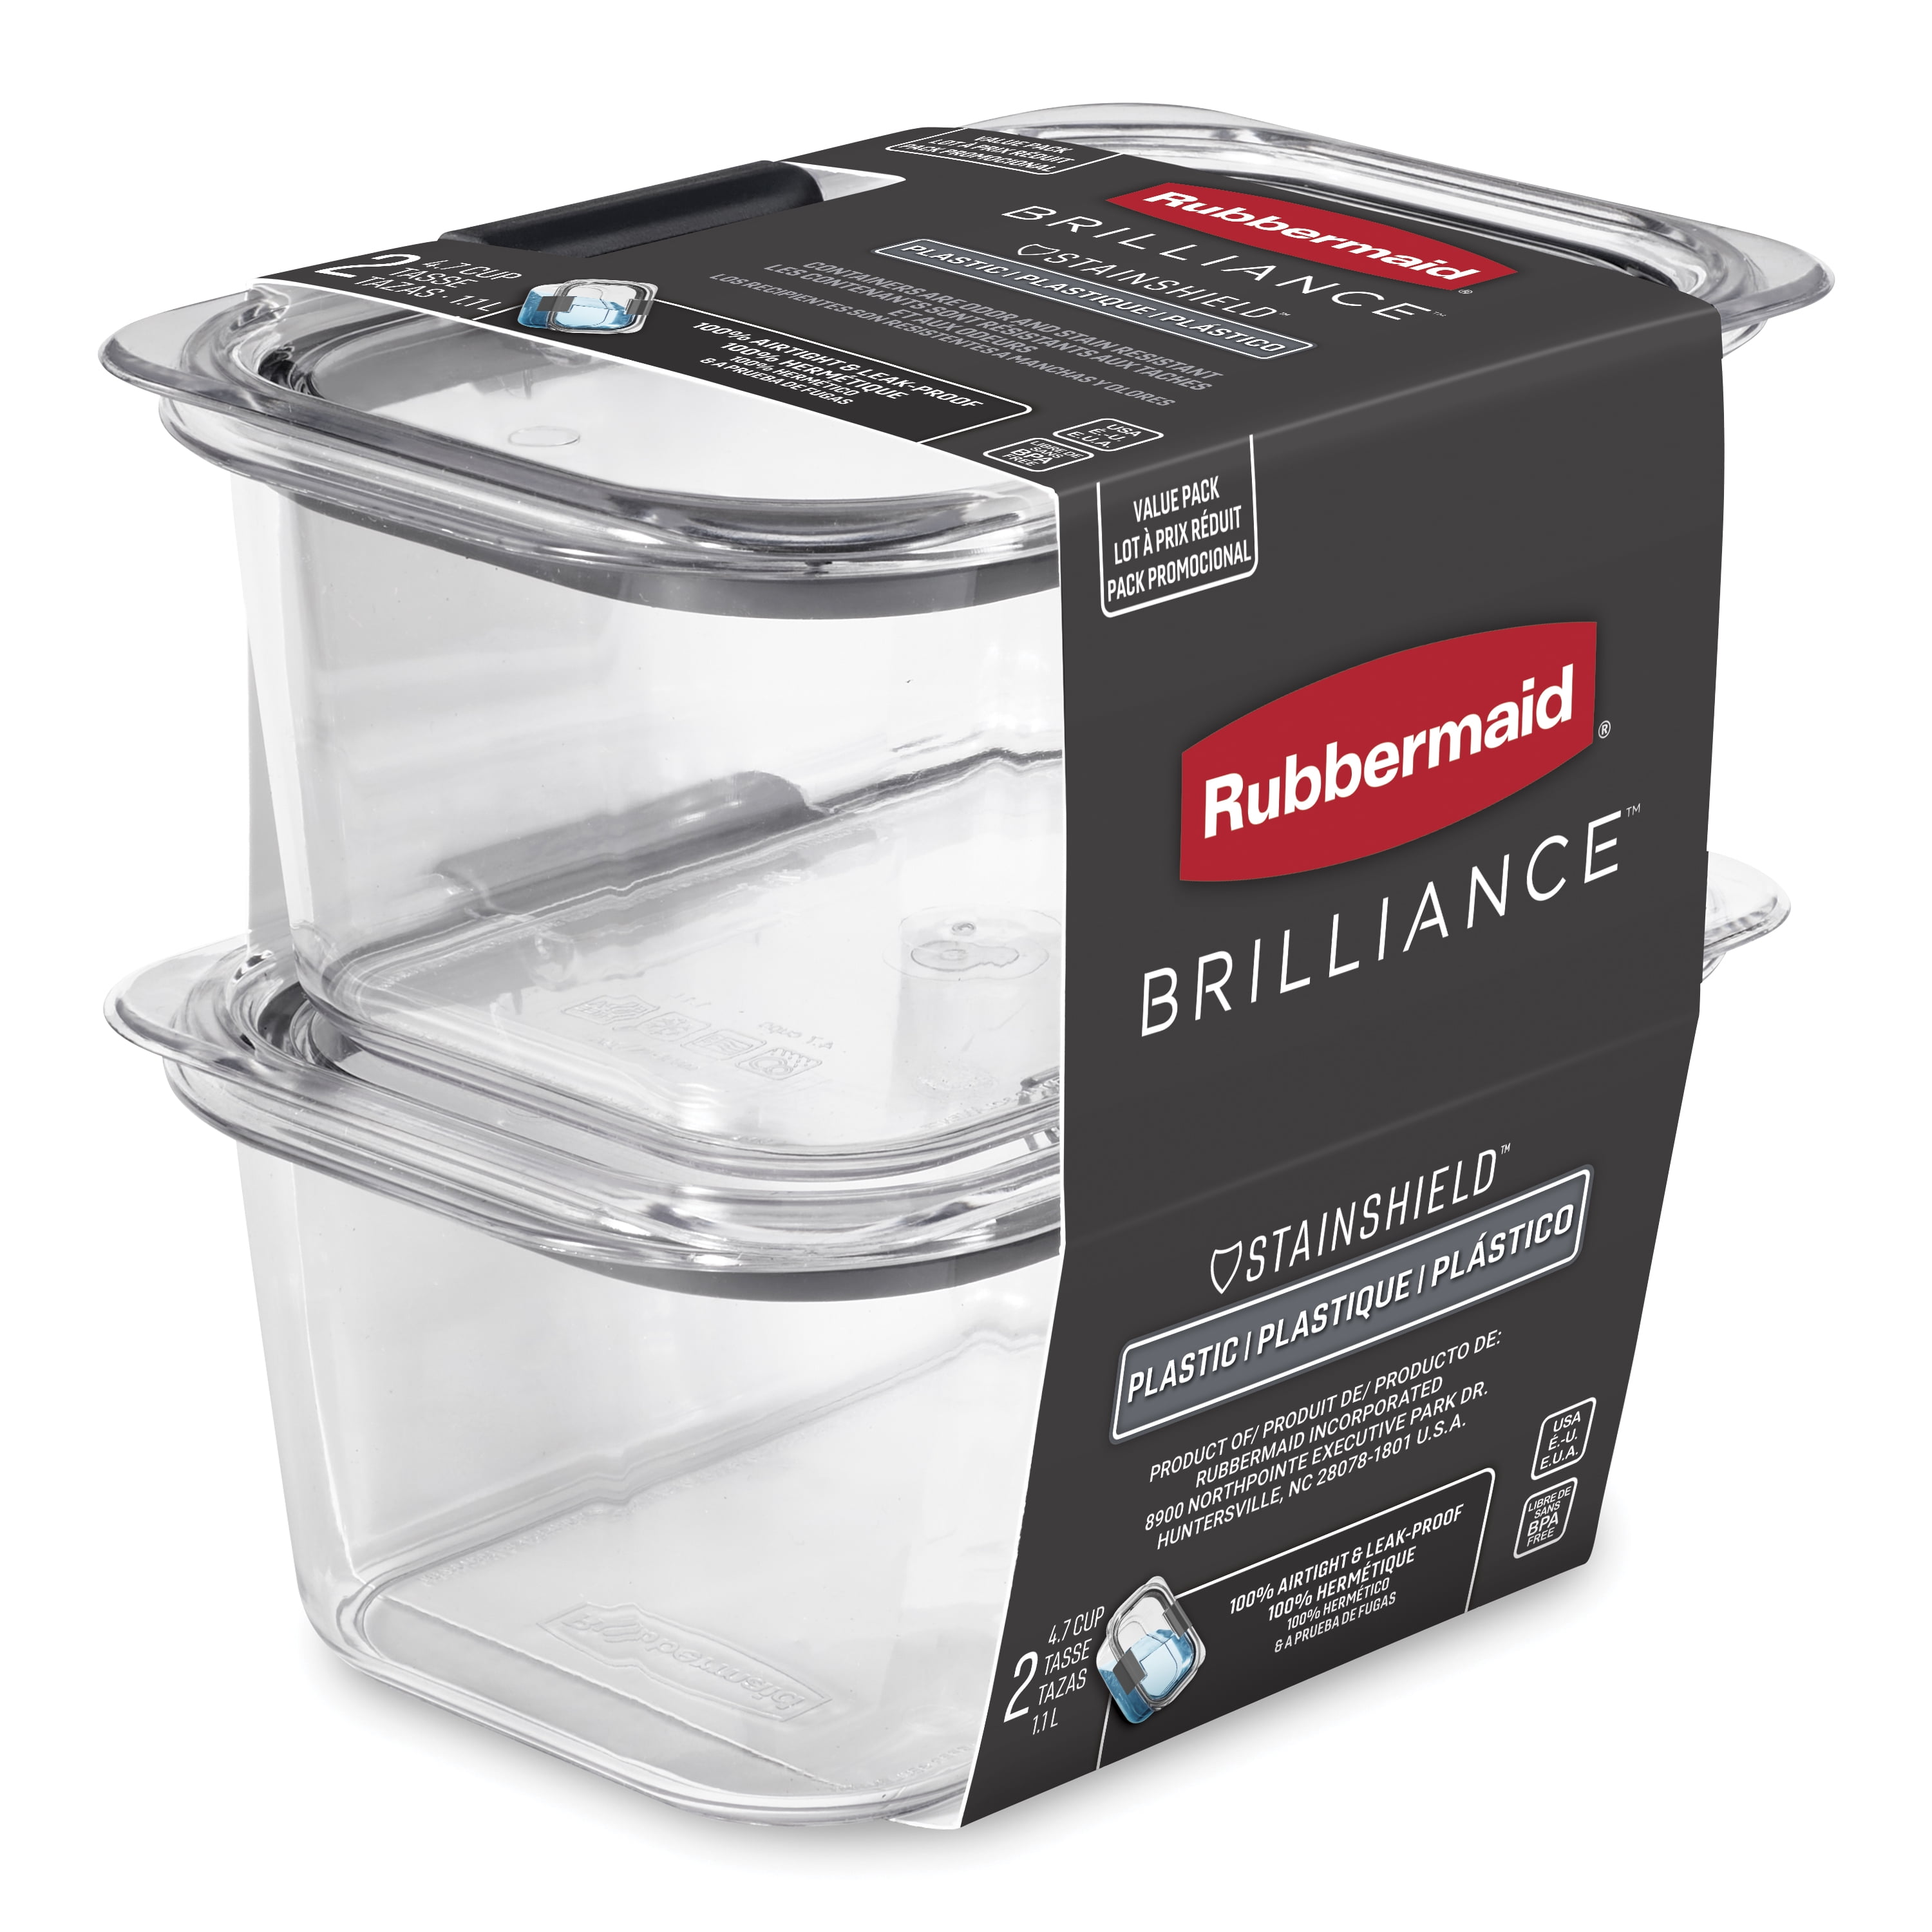 Rubbermaid Brilliance 4.7 Cup Medium Stain-Proof Food Storage Container, Set  of 2 